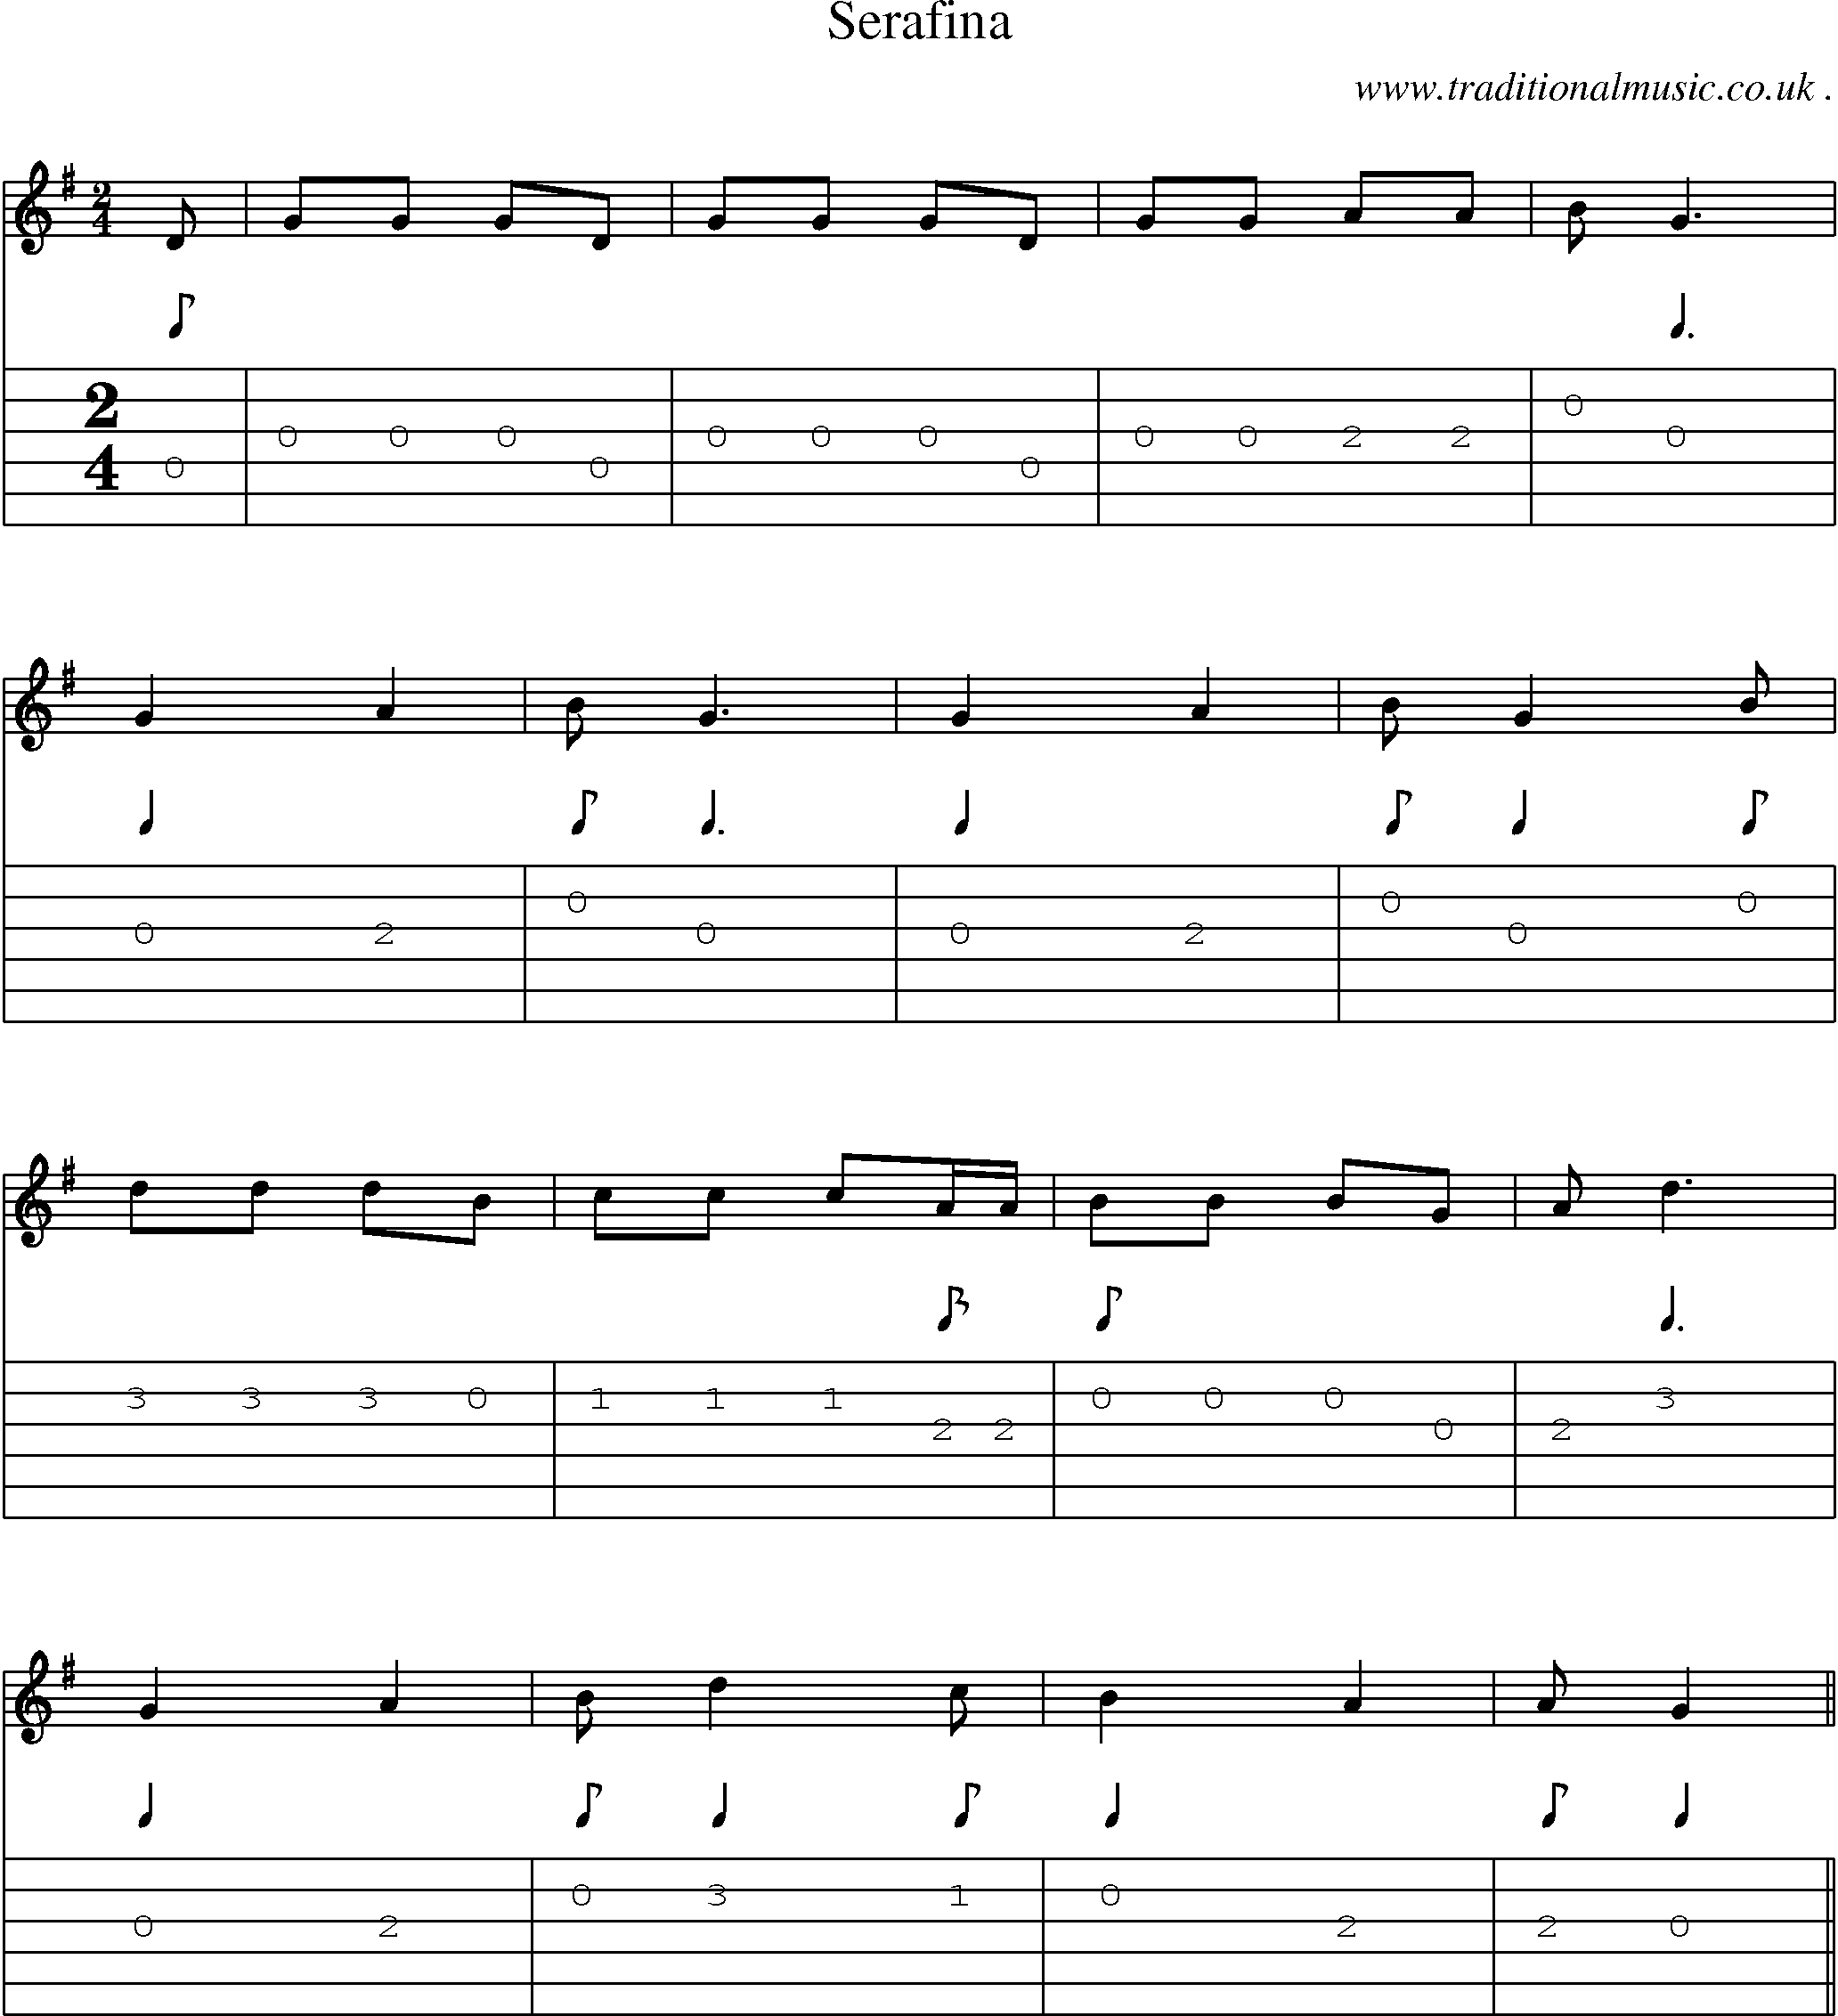 Sheet-Music and Guitar Tabs for Serafina